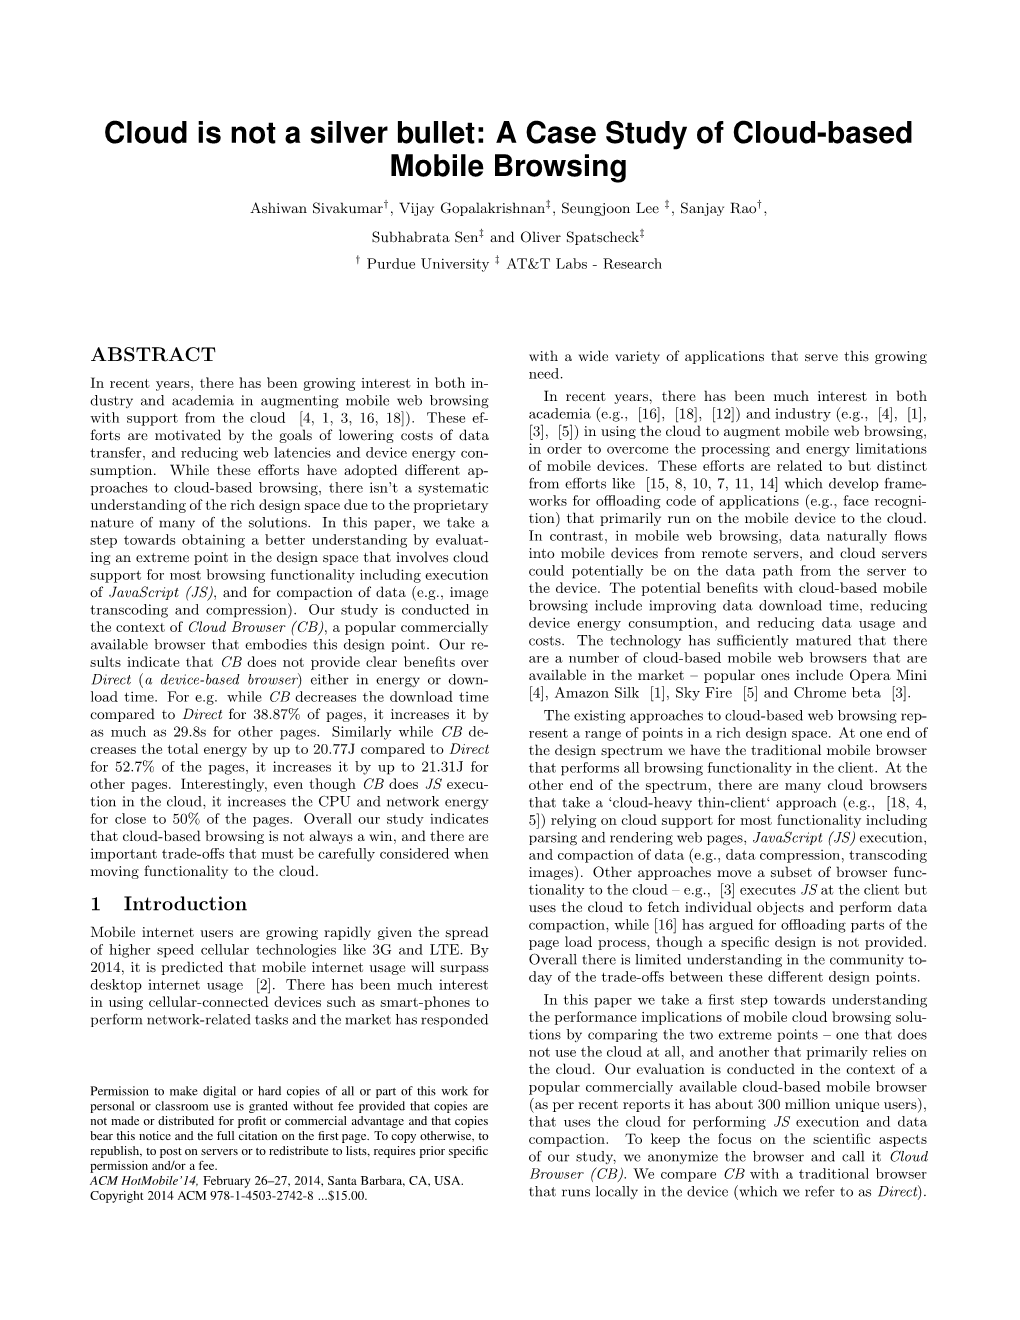 Cloud Is Not a Silver Bullet: a Case Study of Cloud-Based Mobile Browsing